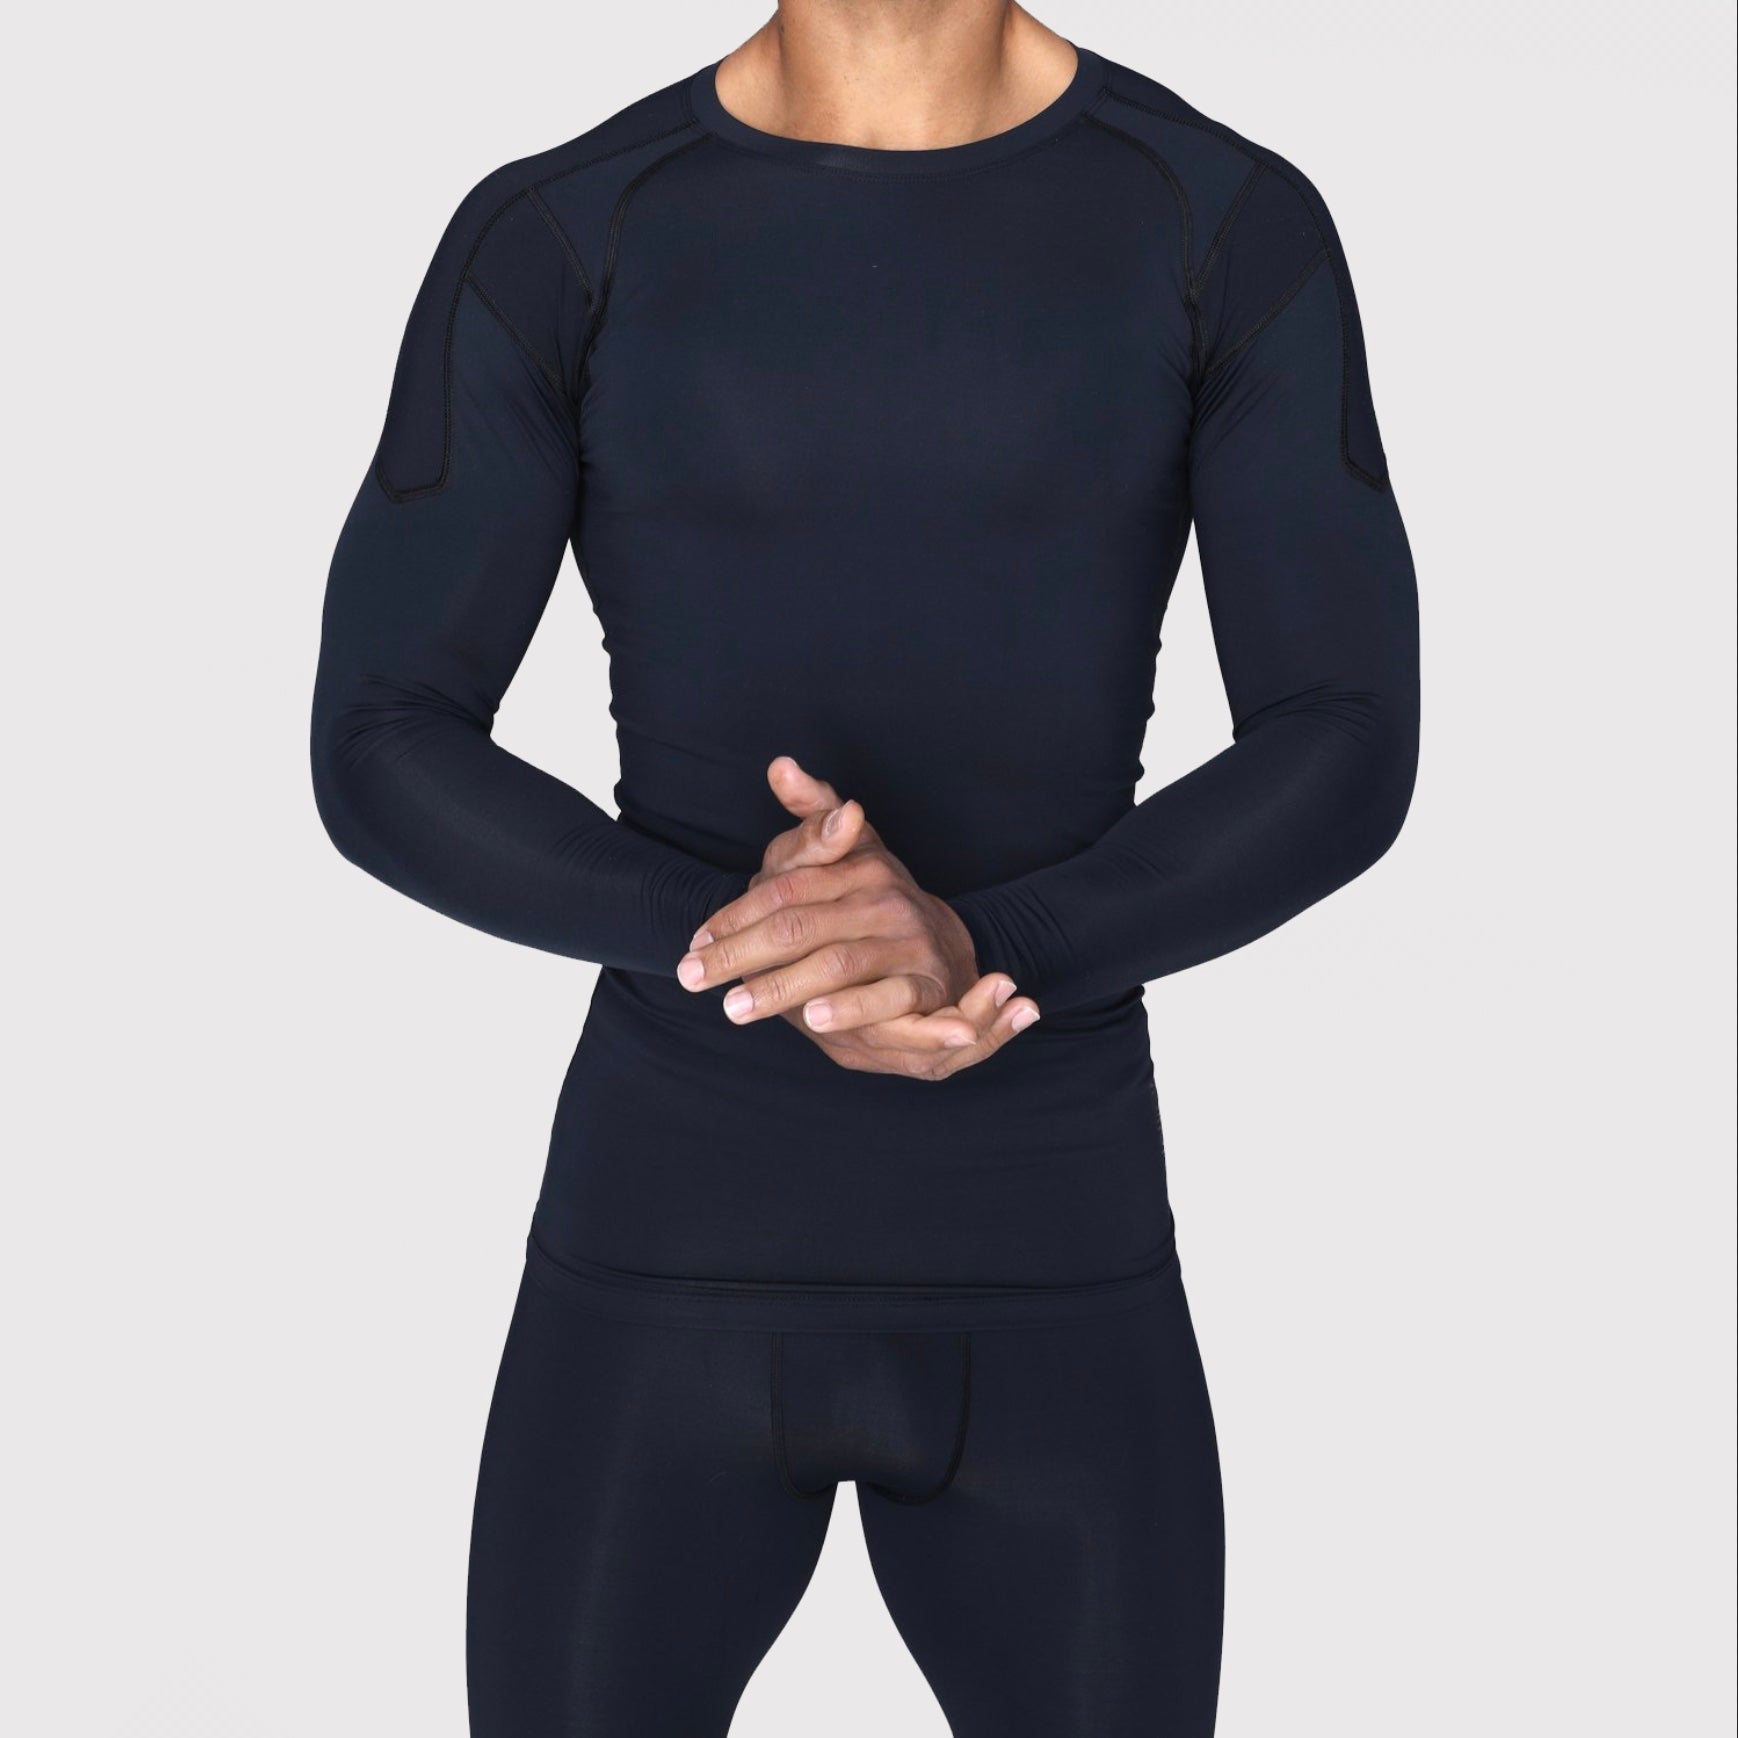 Mens Compression Shirt  Ease Your Aches and Pains Now